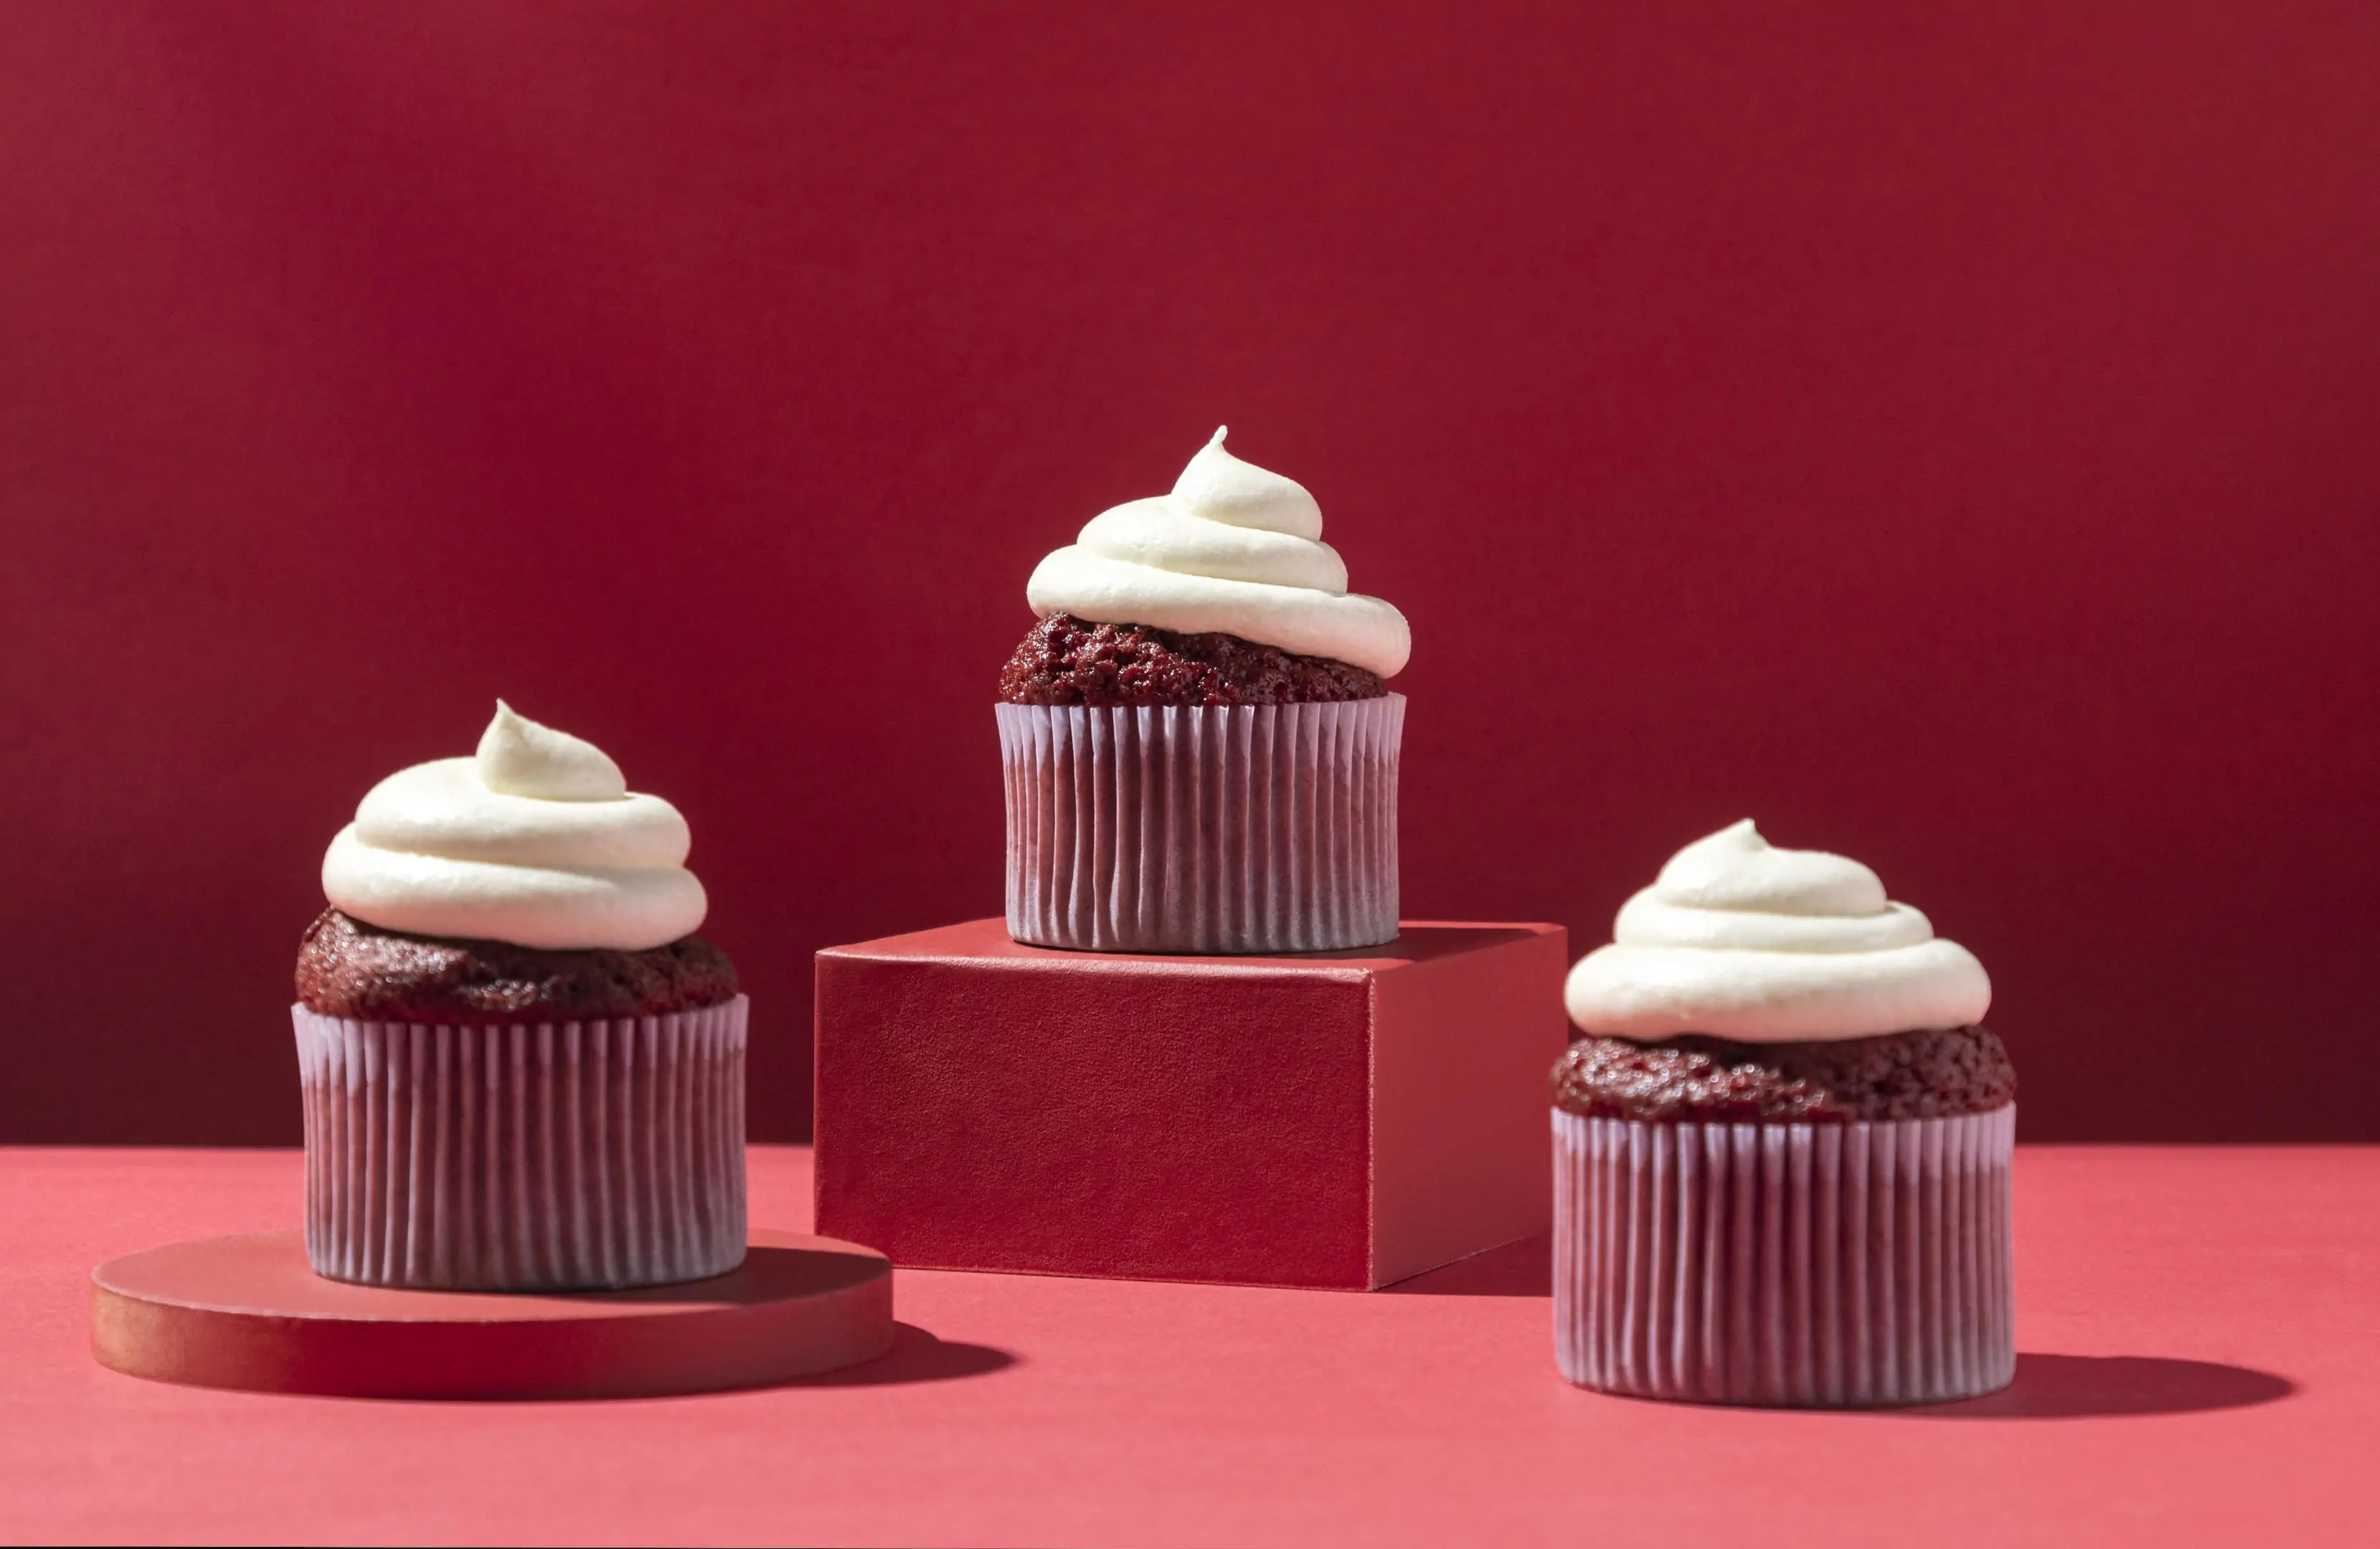 Red velvet cupcakes with cream on red background